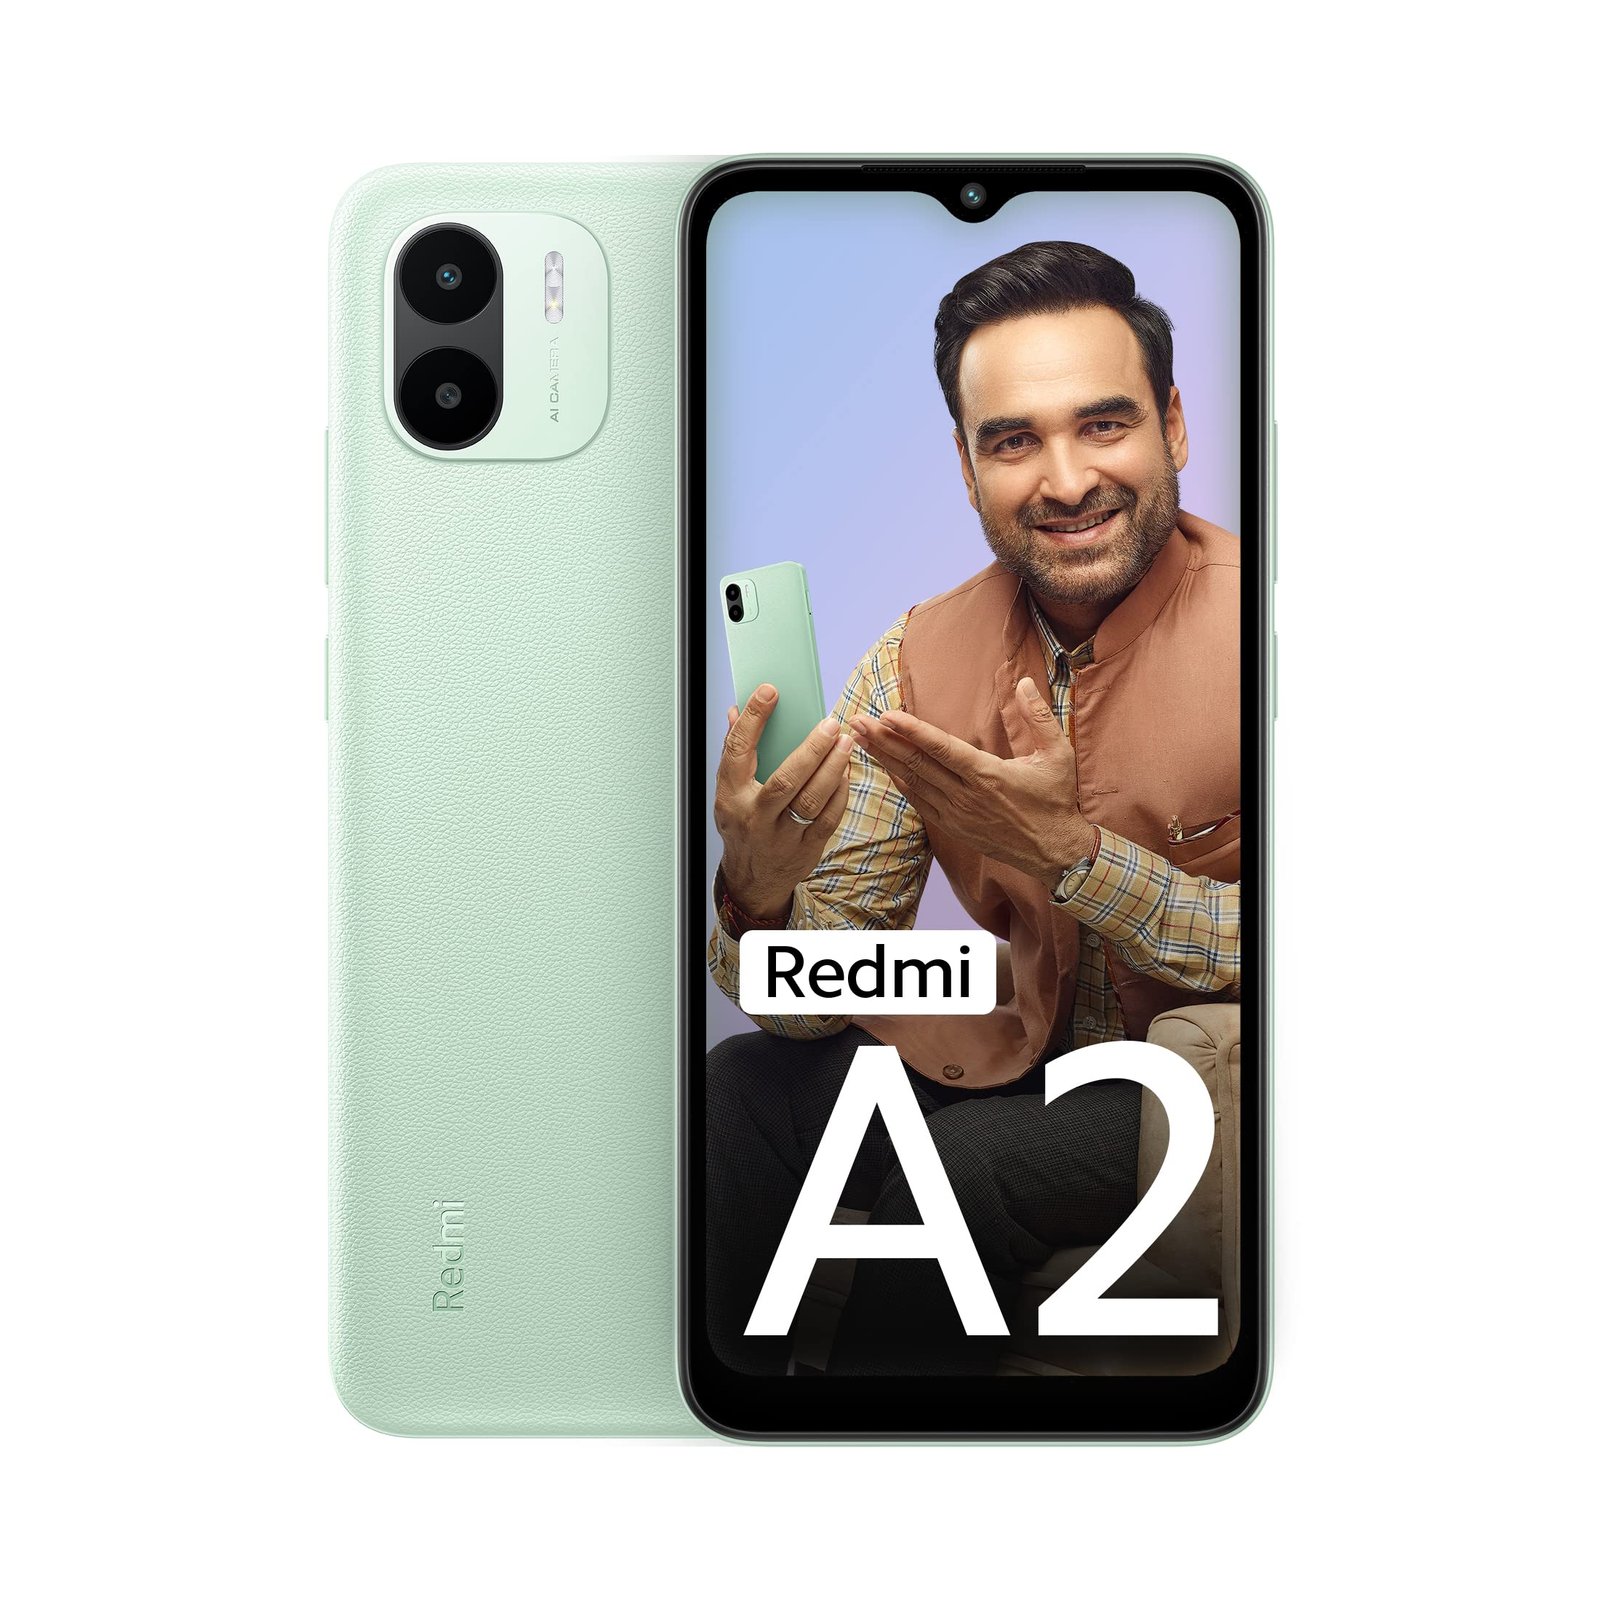 Key Features of Redmi A2